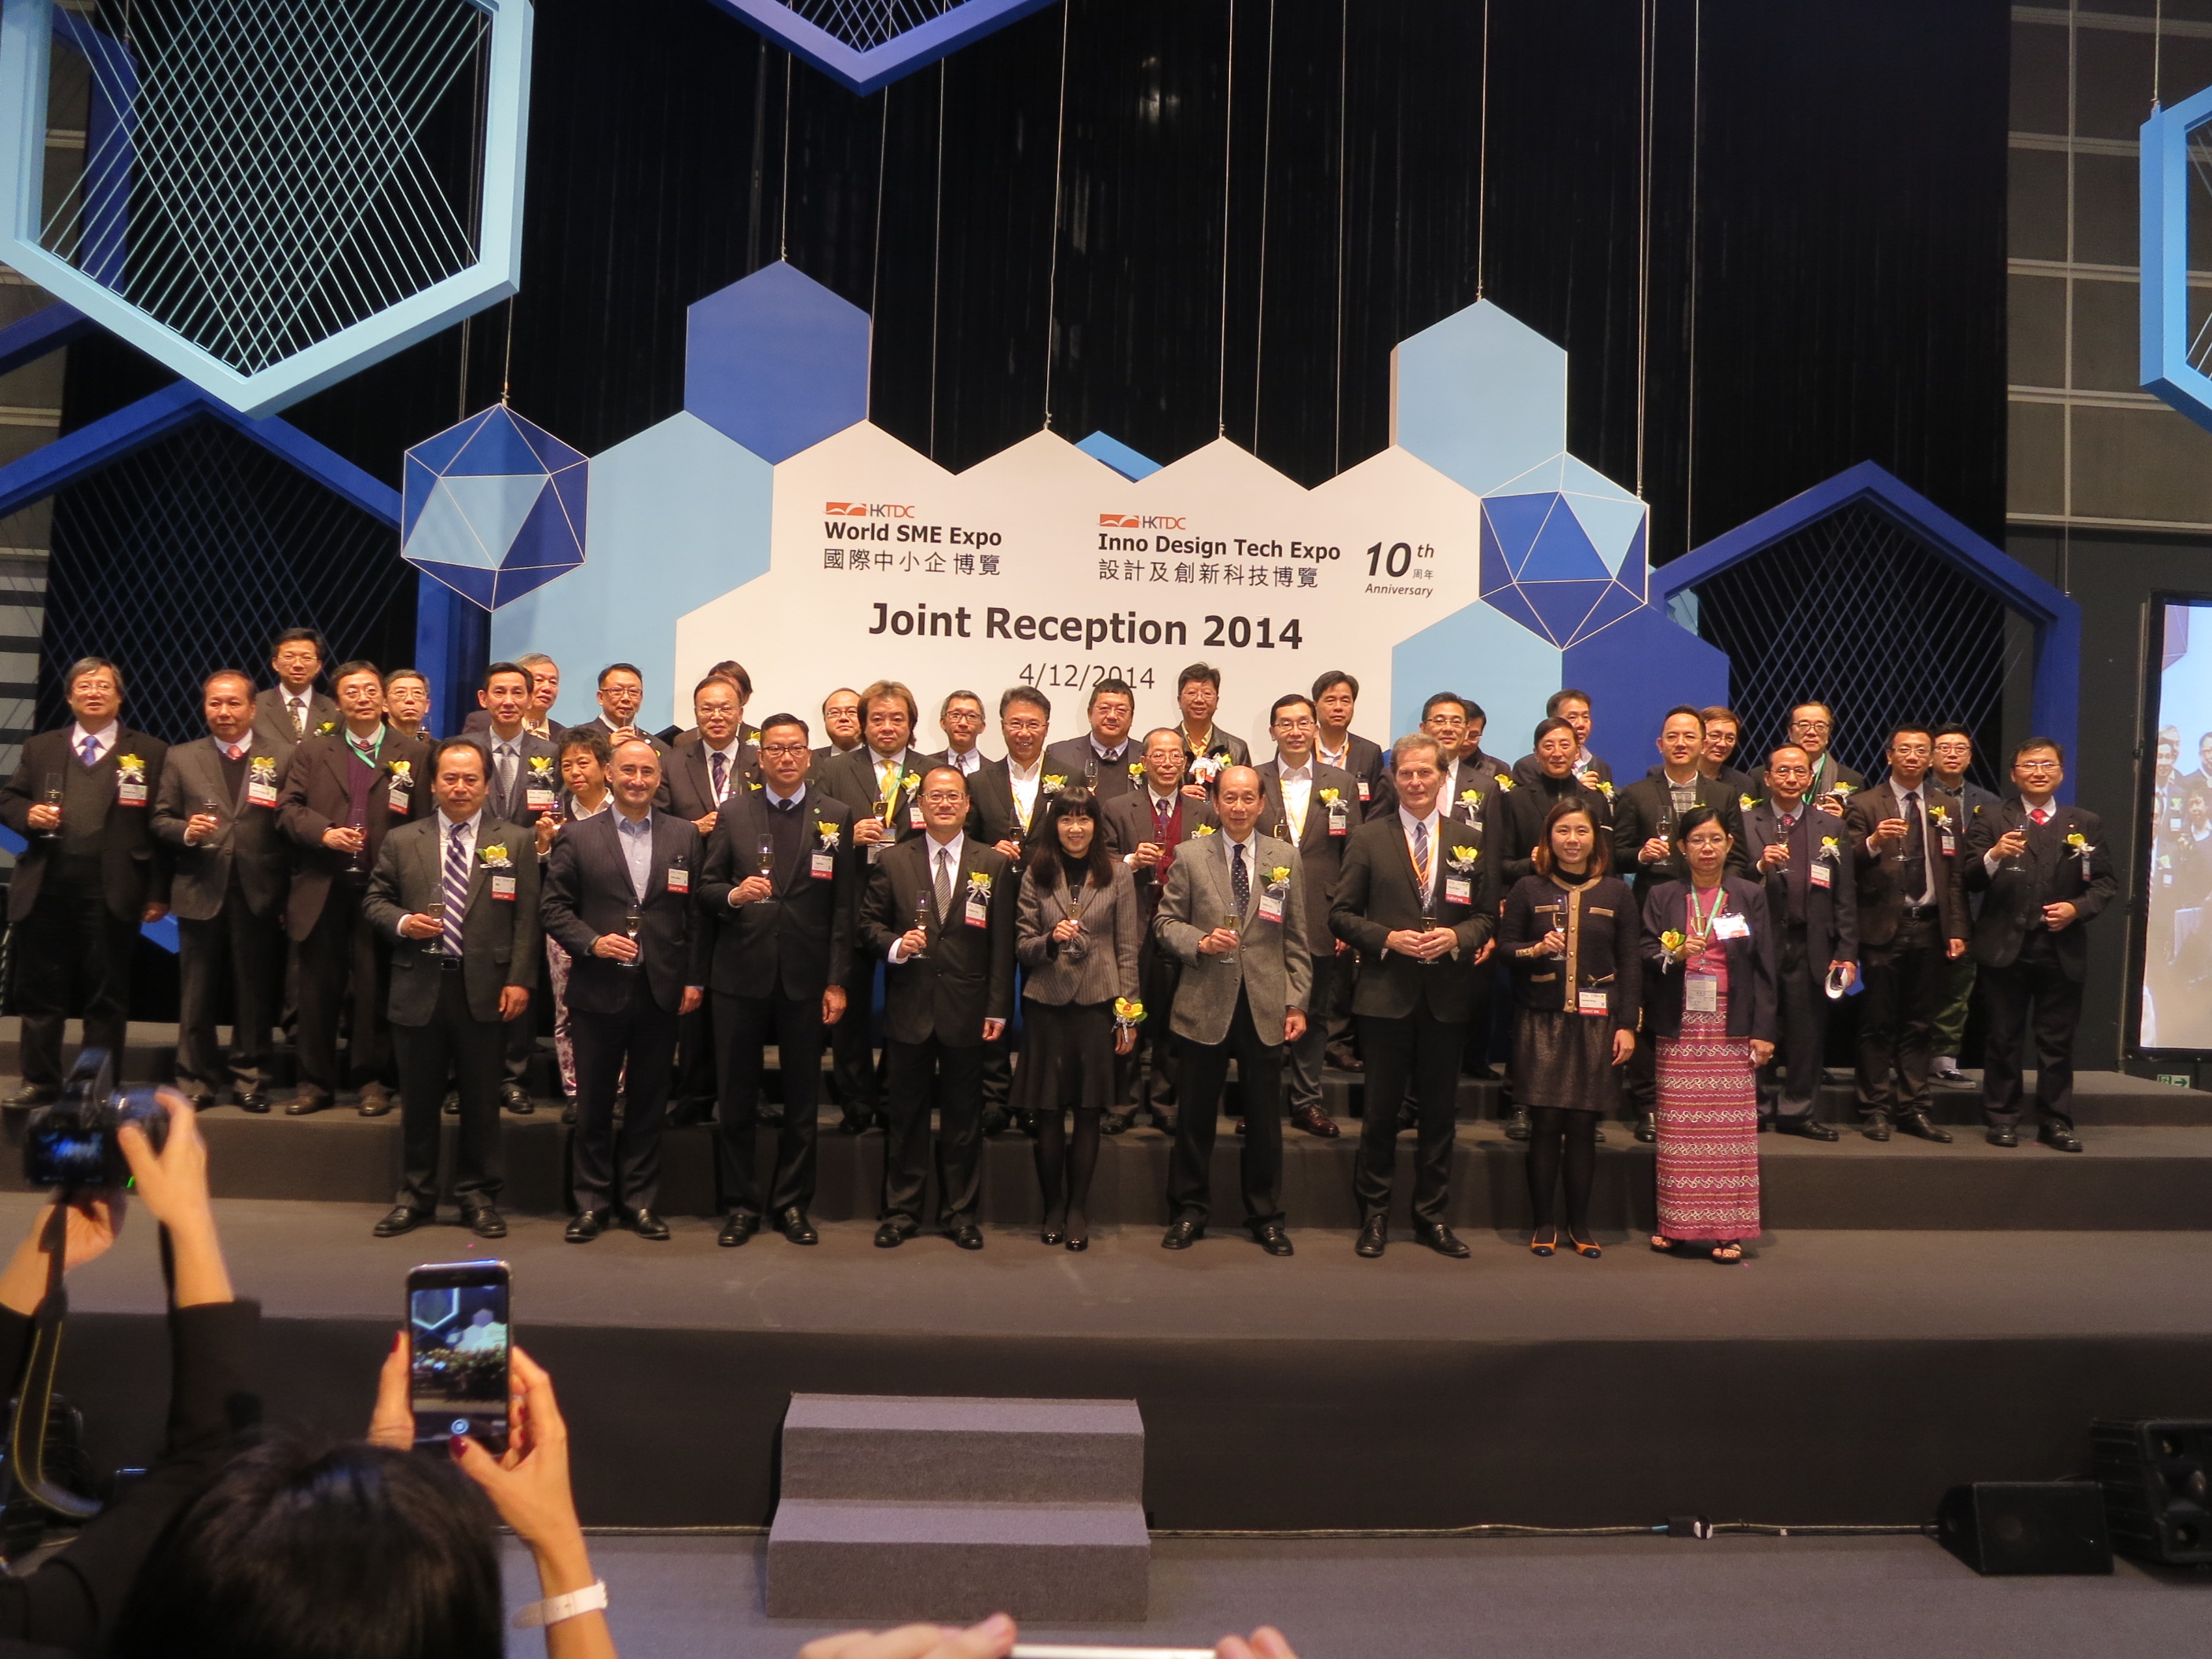 Photo 9 : Dr Jonathan Choi Koon-shum, GBS, JP, Chairman of the Small and Medium Enterprises Committee, attended the Joint Reception for World SME Expo and Inno Design Tech Expo 10th Anniversary held in Hong Kong Convention and Exhibition Centre on 4 December 2014 as Guest of Honour.